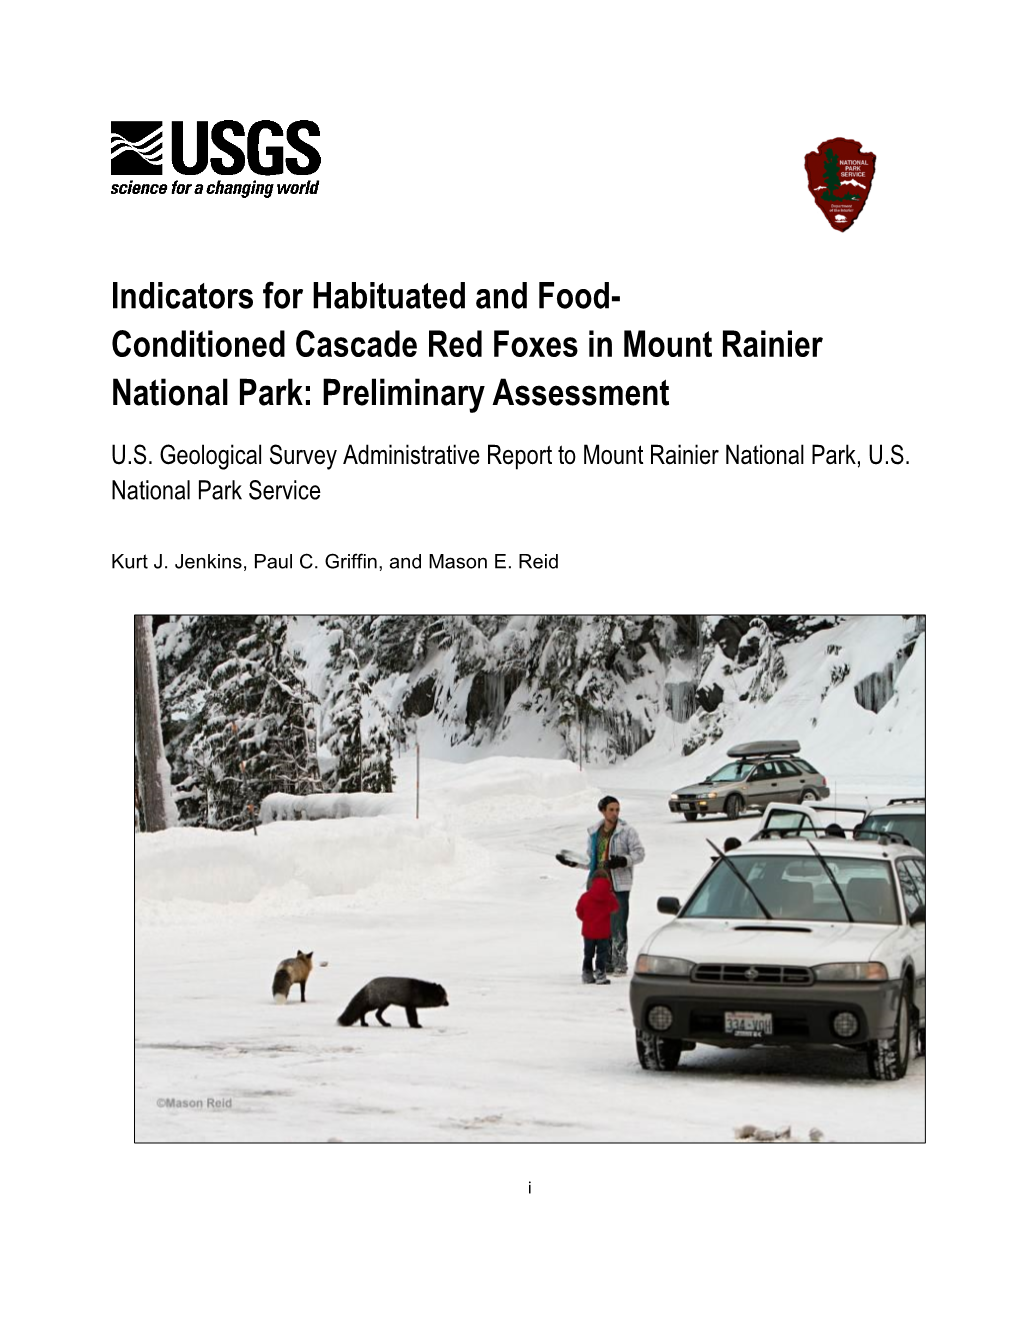 Indicators for Habituated and Food-Conditioned Cascade Red Foxes in Mount Rainier National Park: Preliminary Assessment